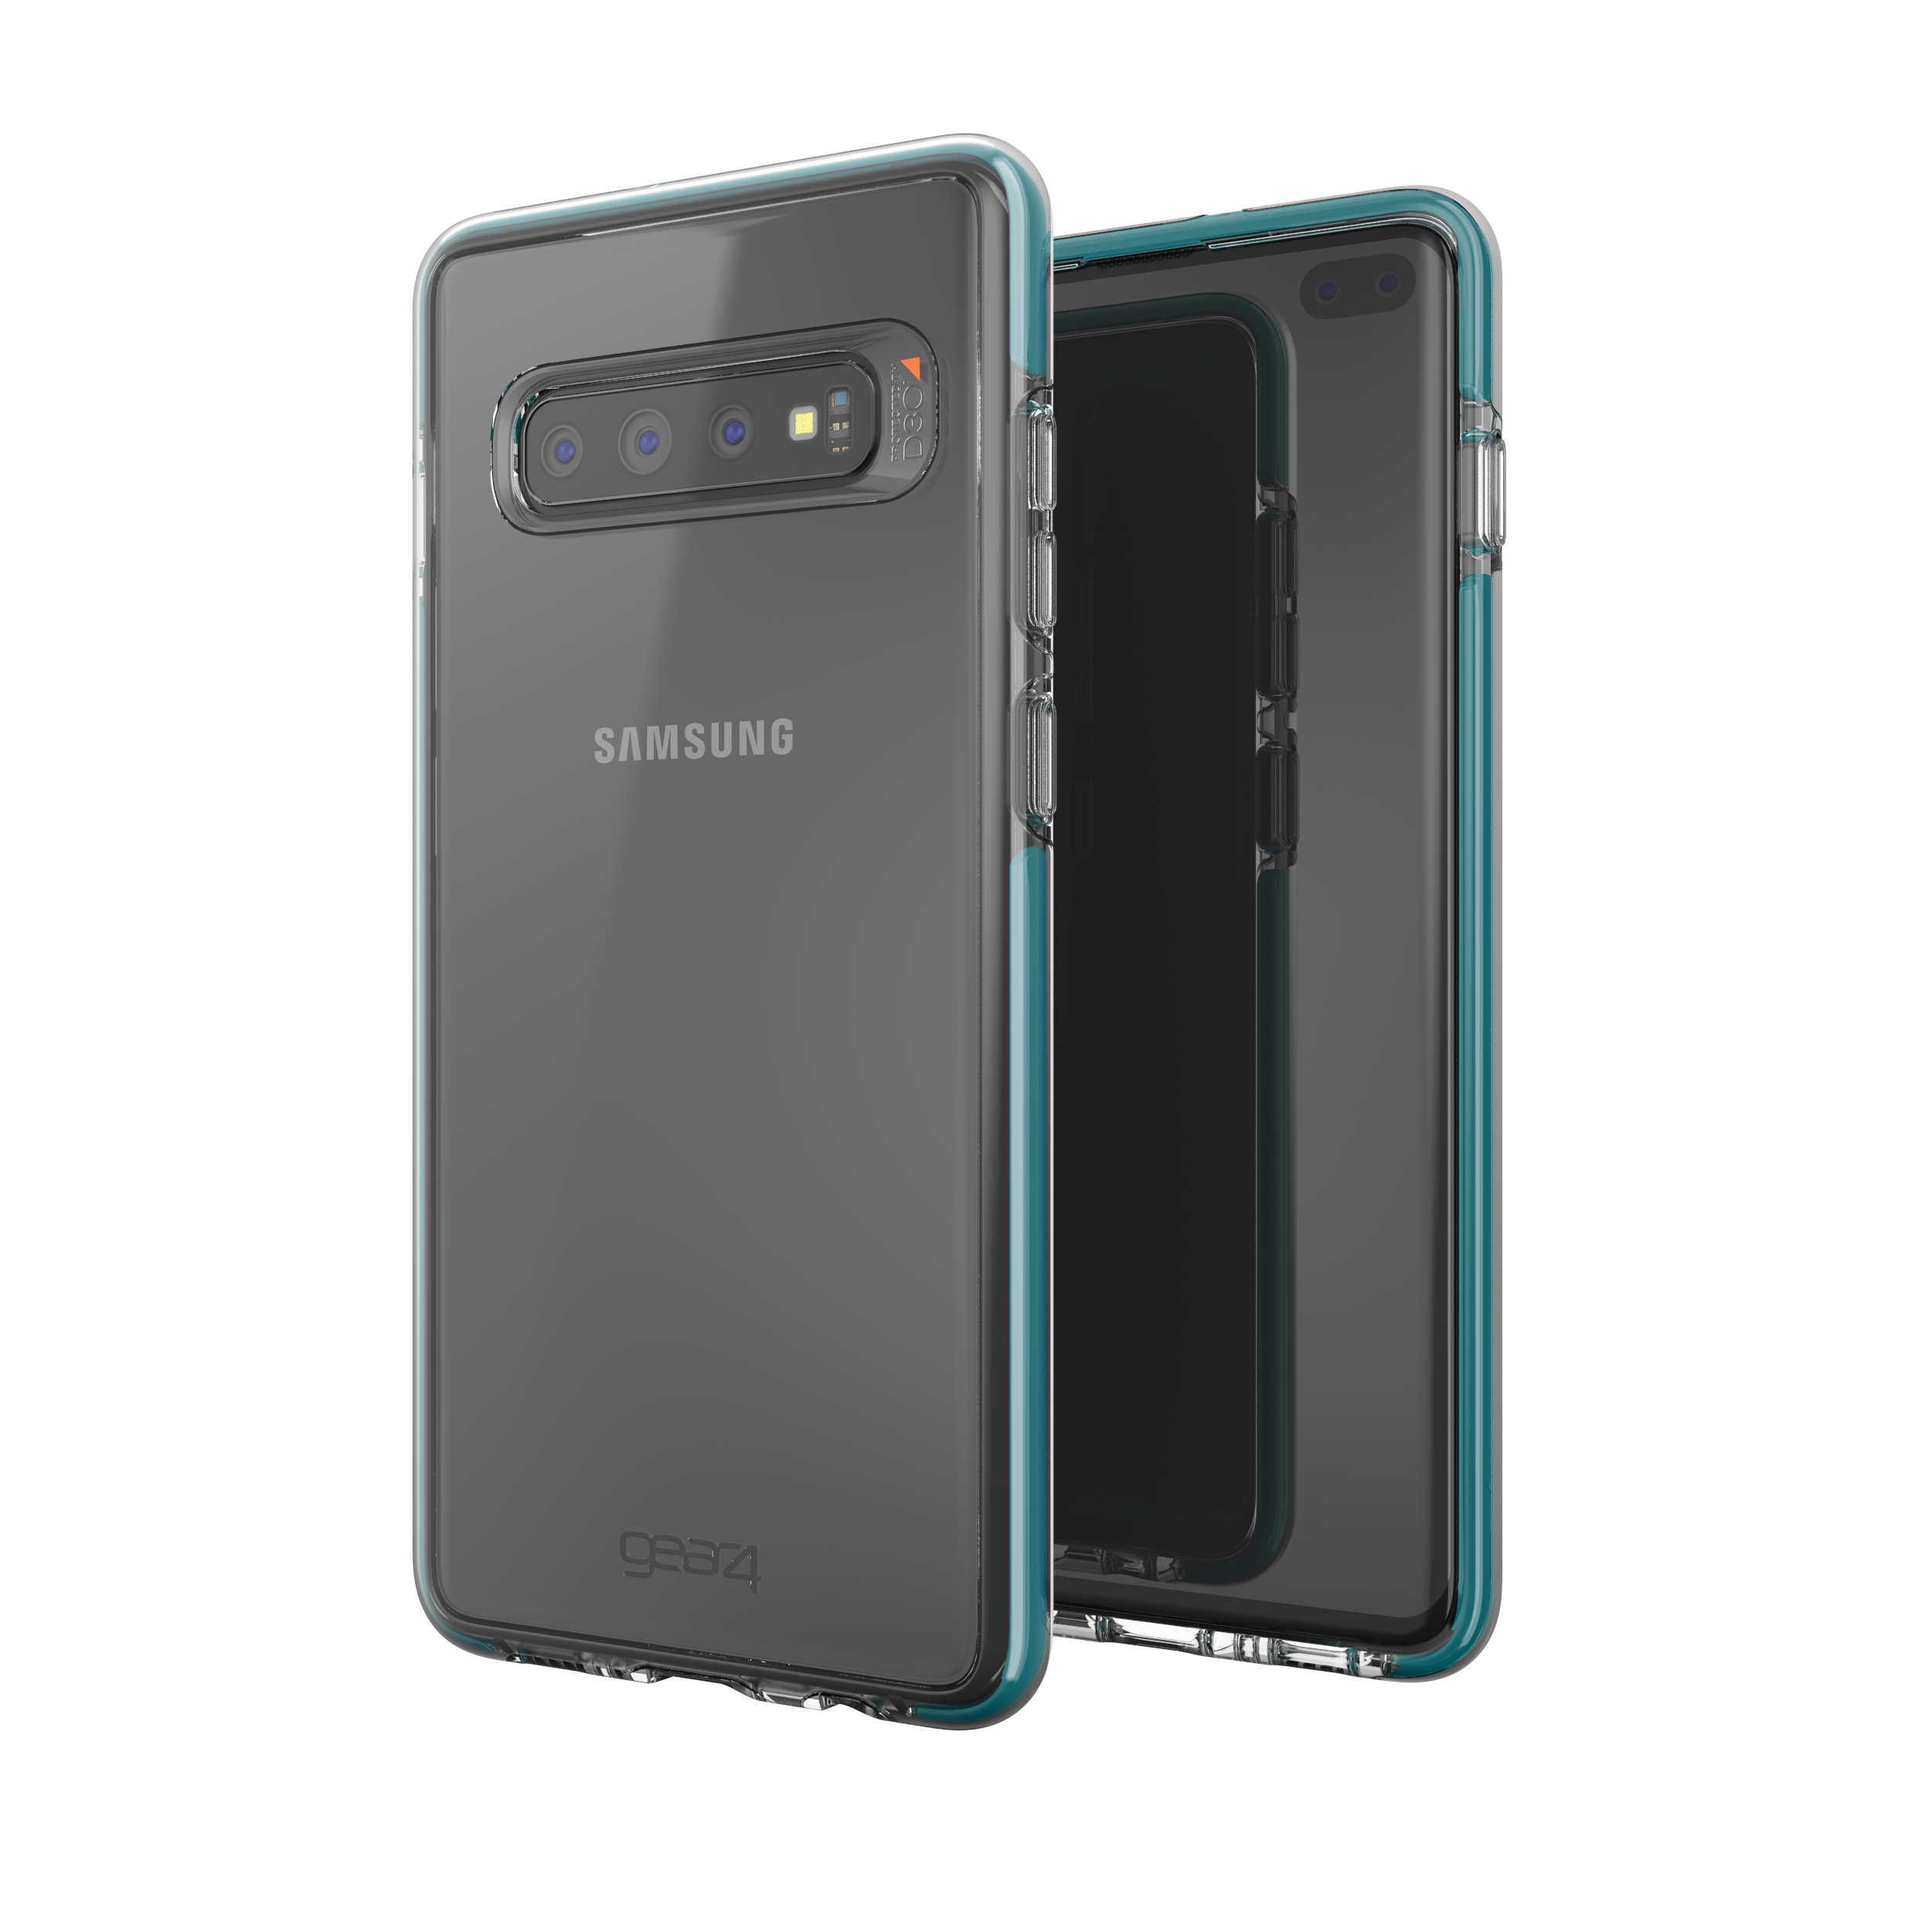 GREEN Backcover, Piccadilly, SAMSUNG, S10+, GEAR4 GALAXY